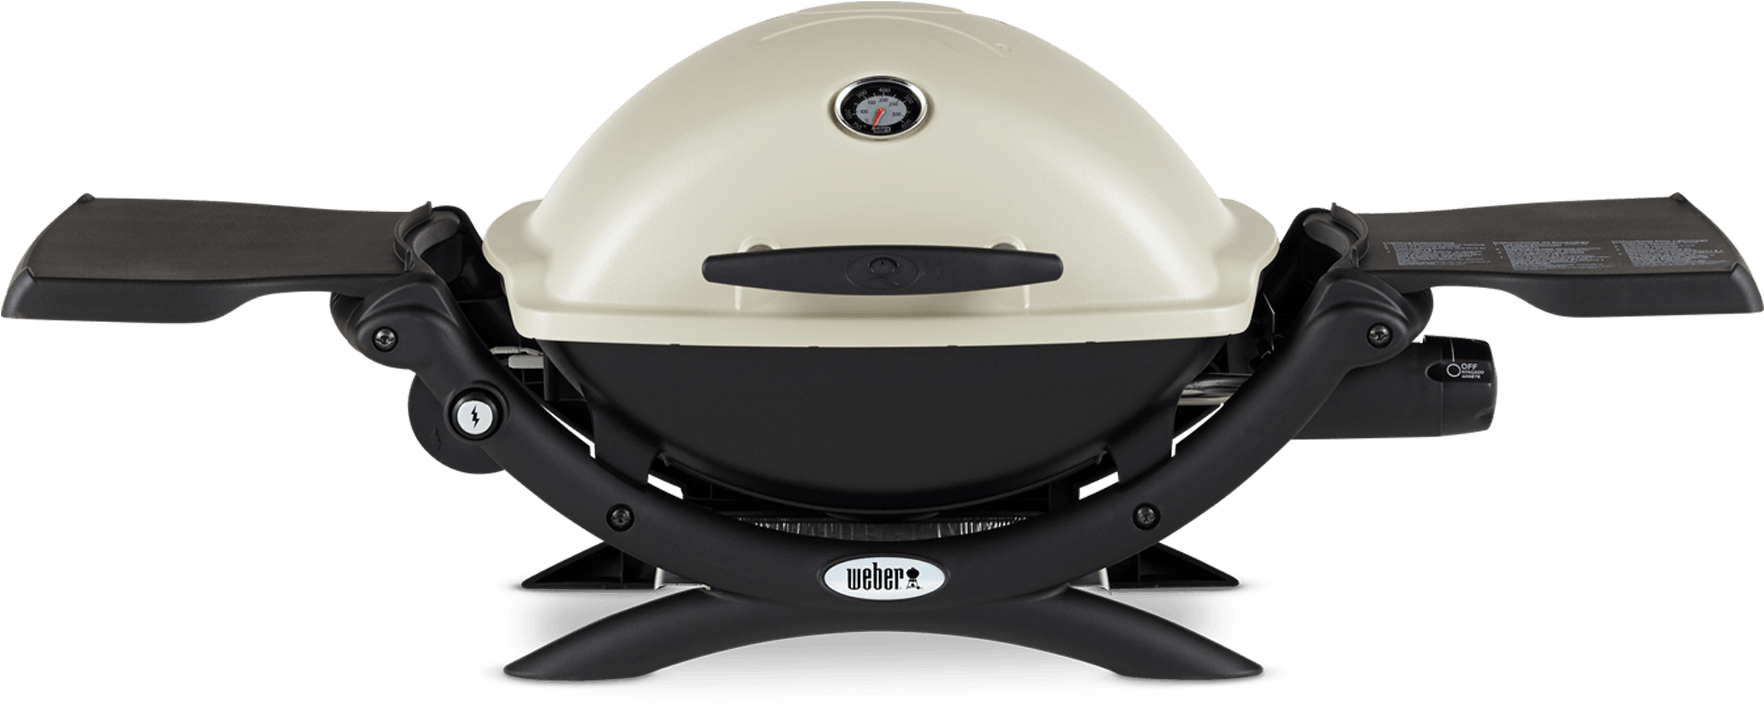 A White And Black Barbecue Grill